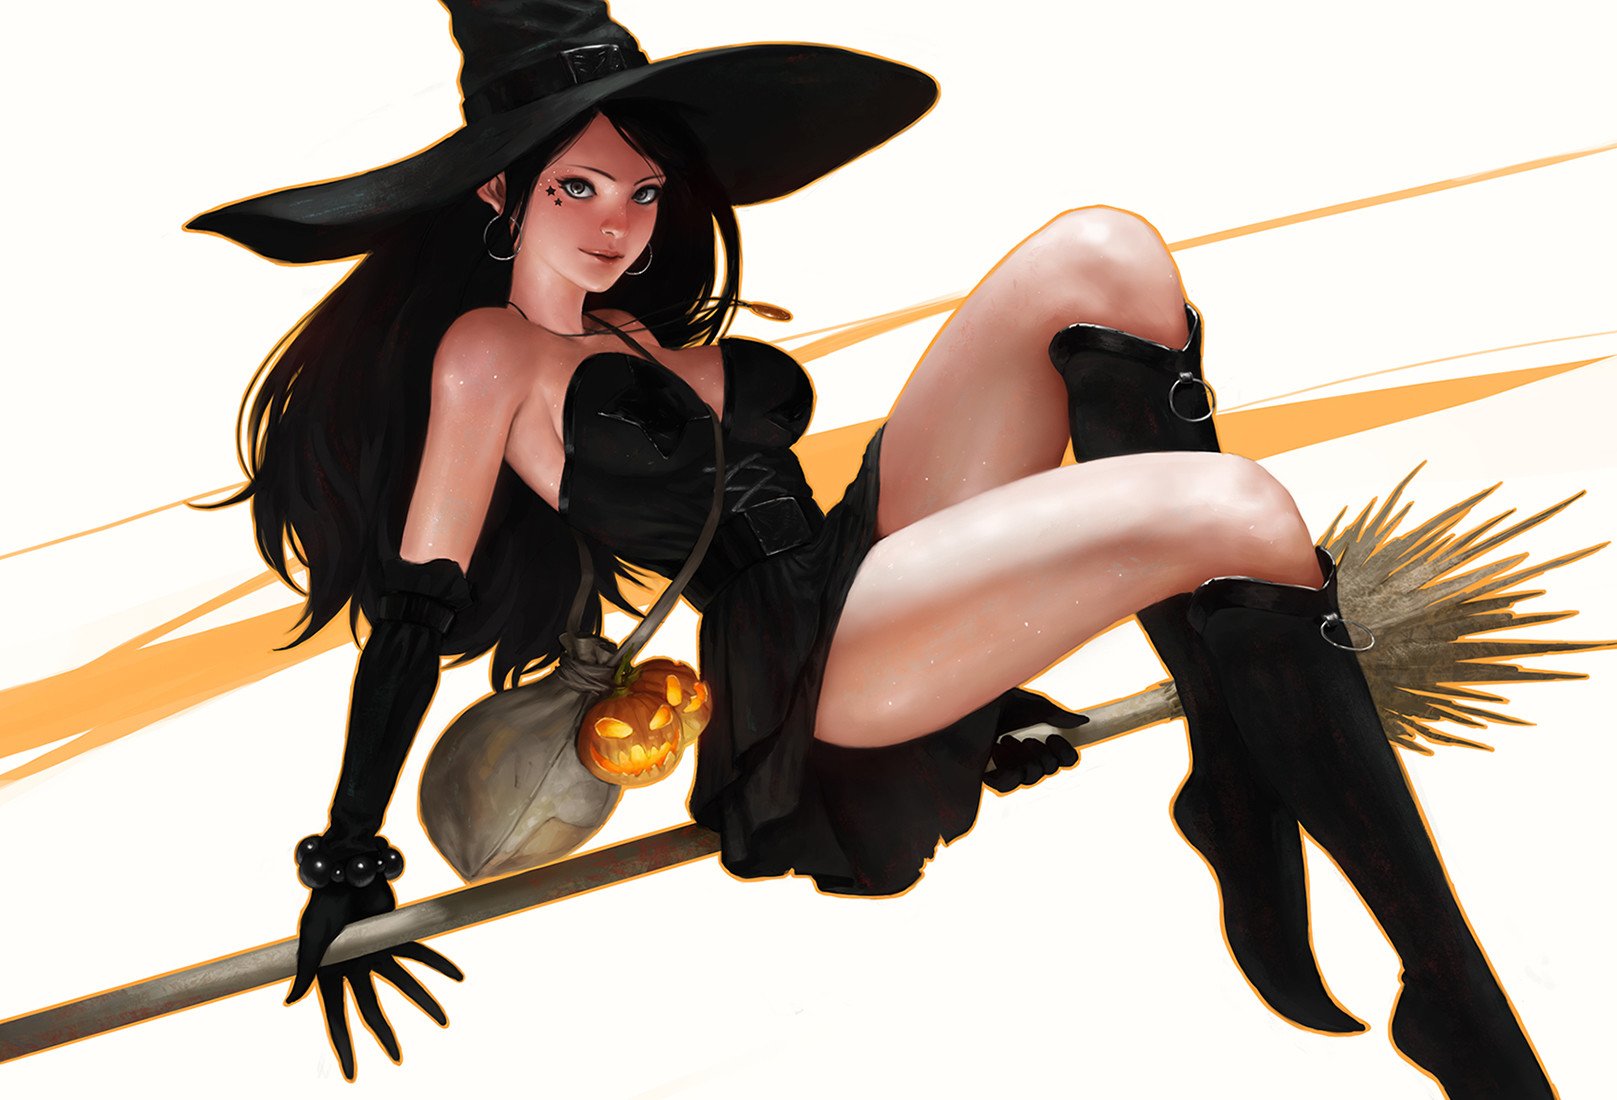 Witch★ by SYAR (SoonYoung Choi)